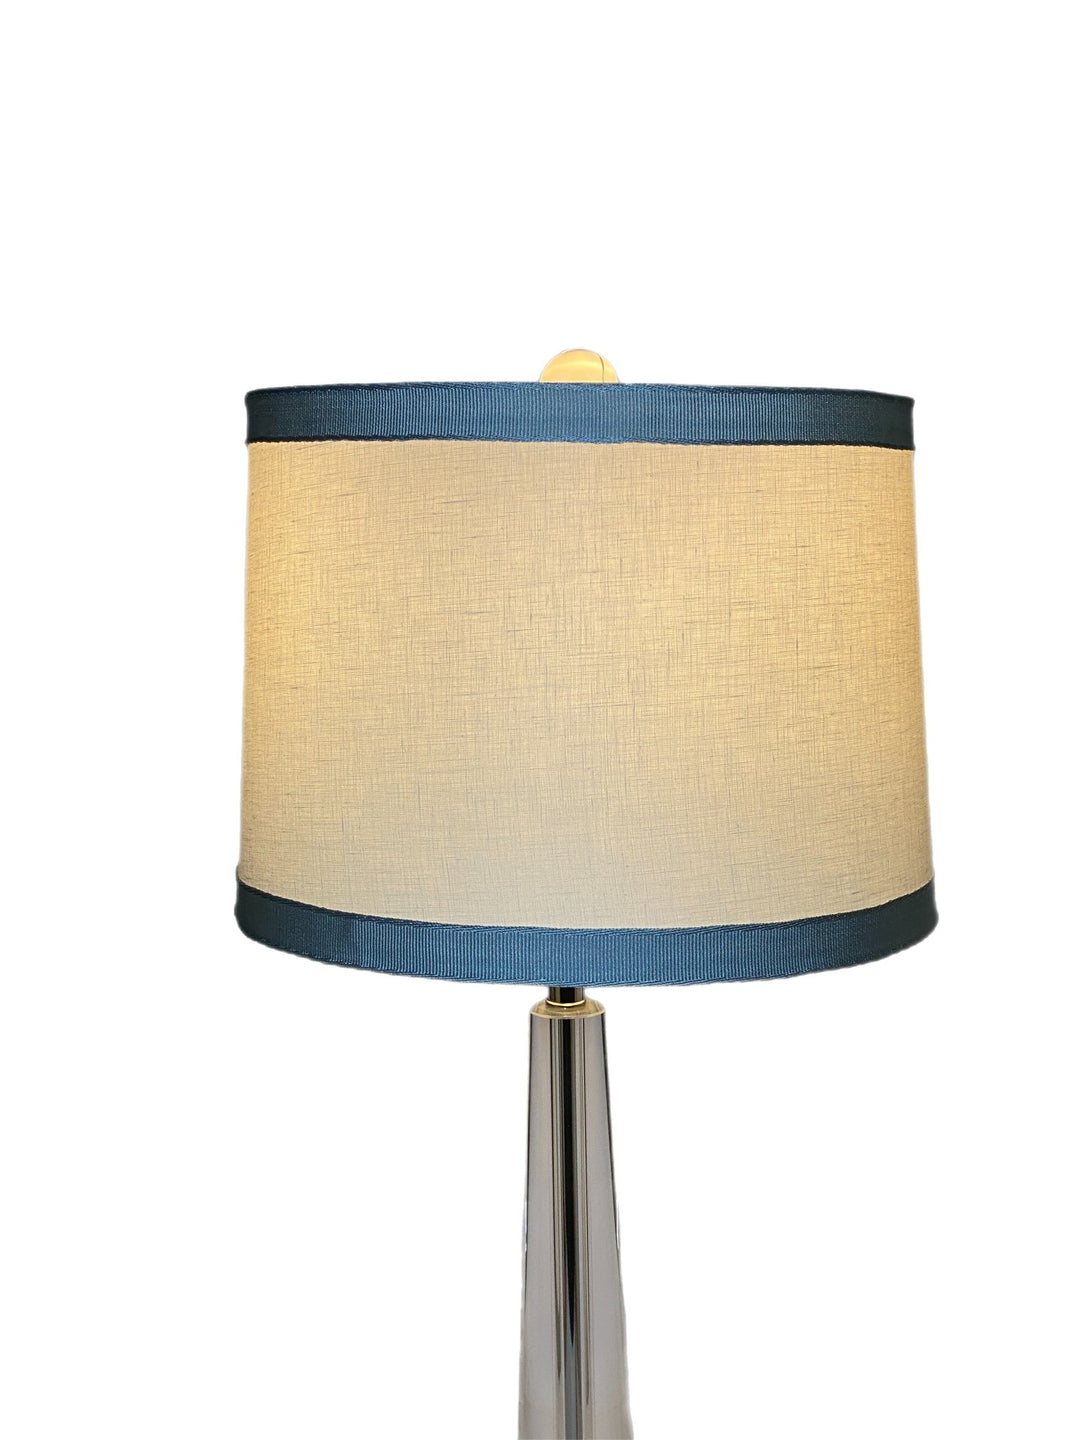 Linen Drum Harback Lamp Shade - Available in Three Sizes + Add Custom Trim - Lux Lamp Shades